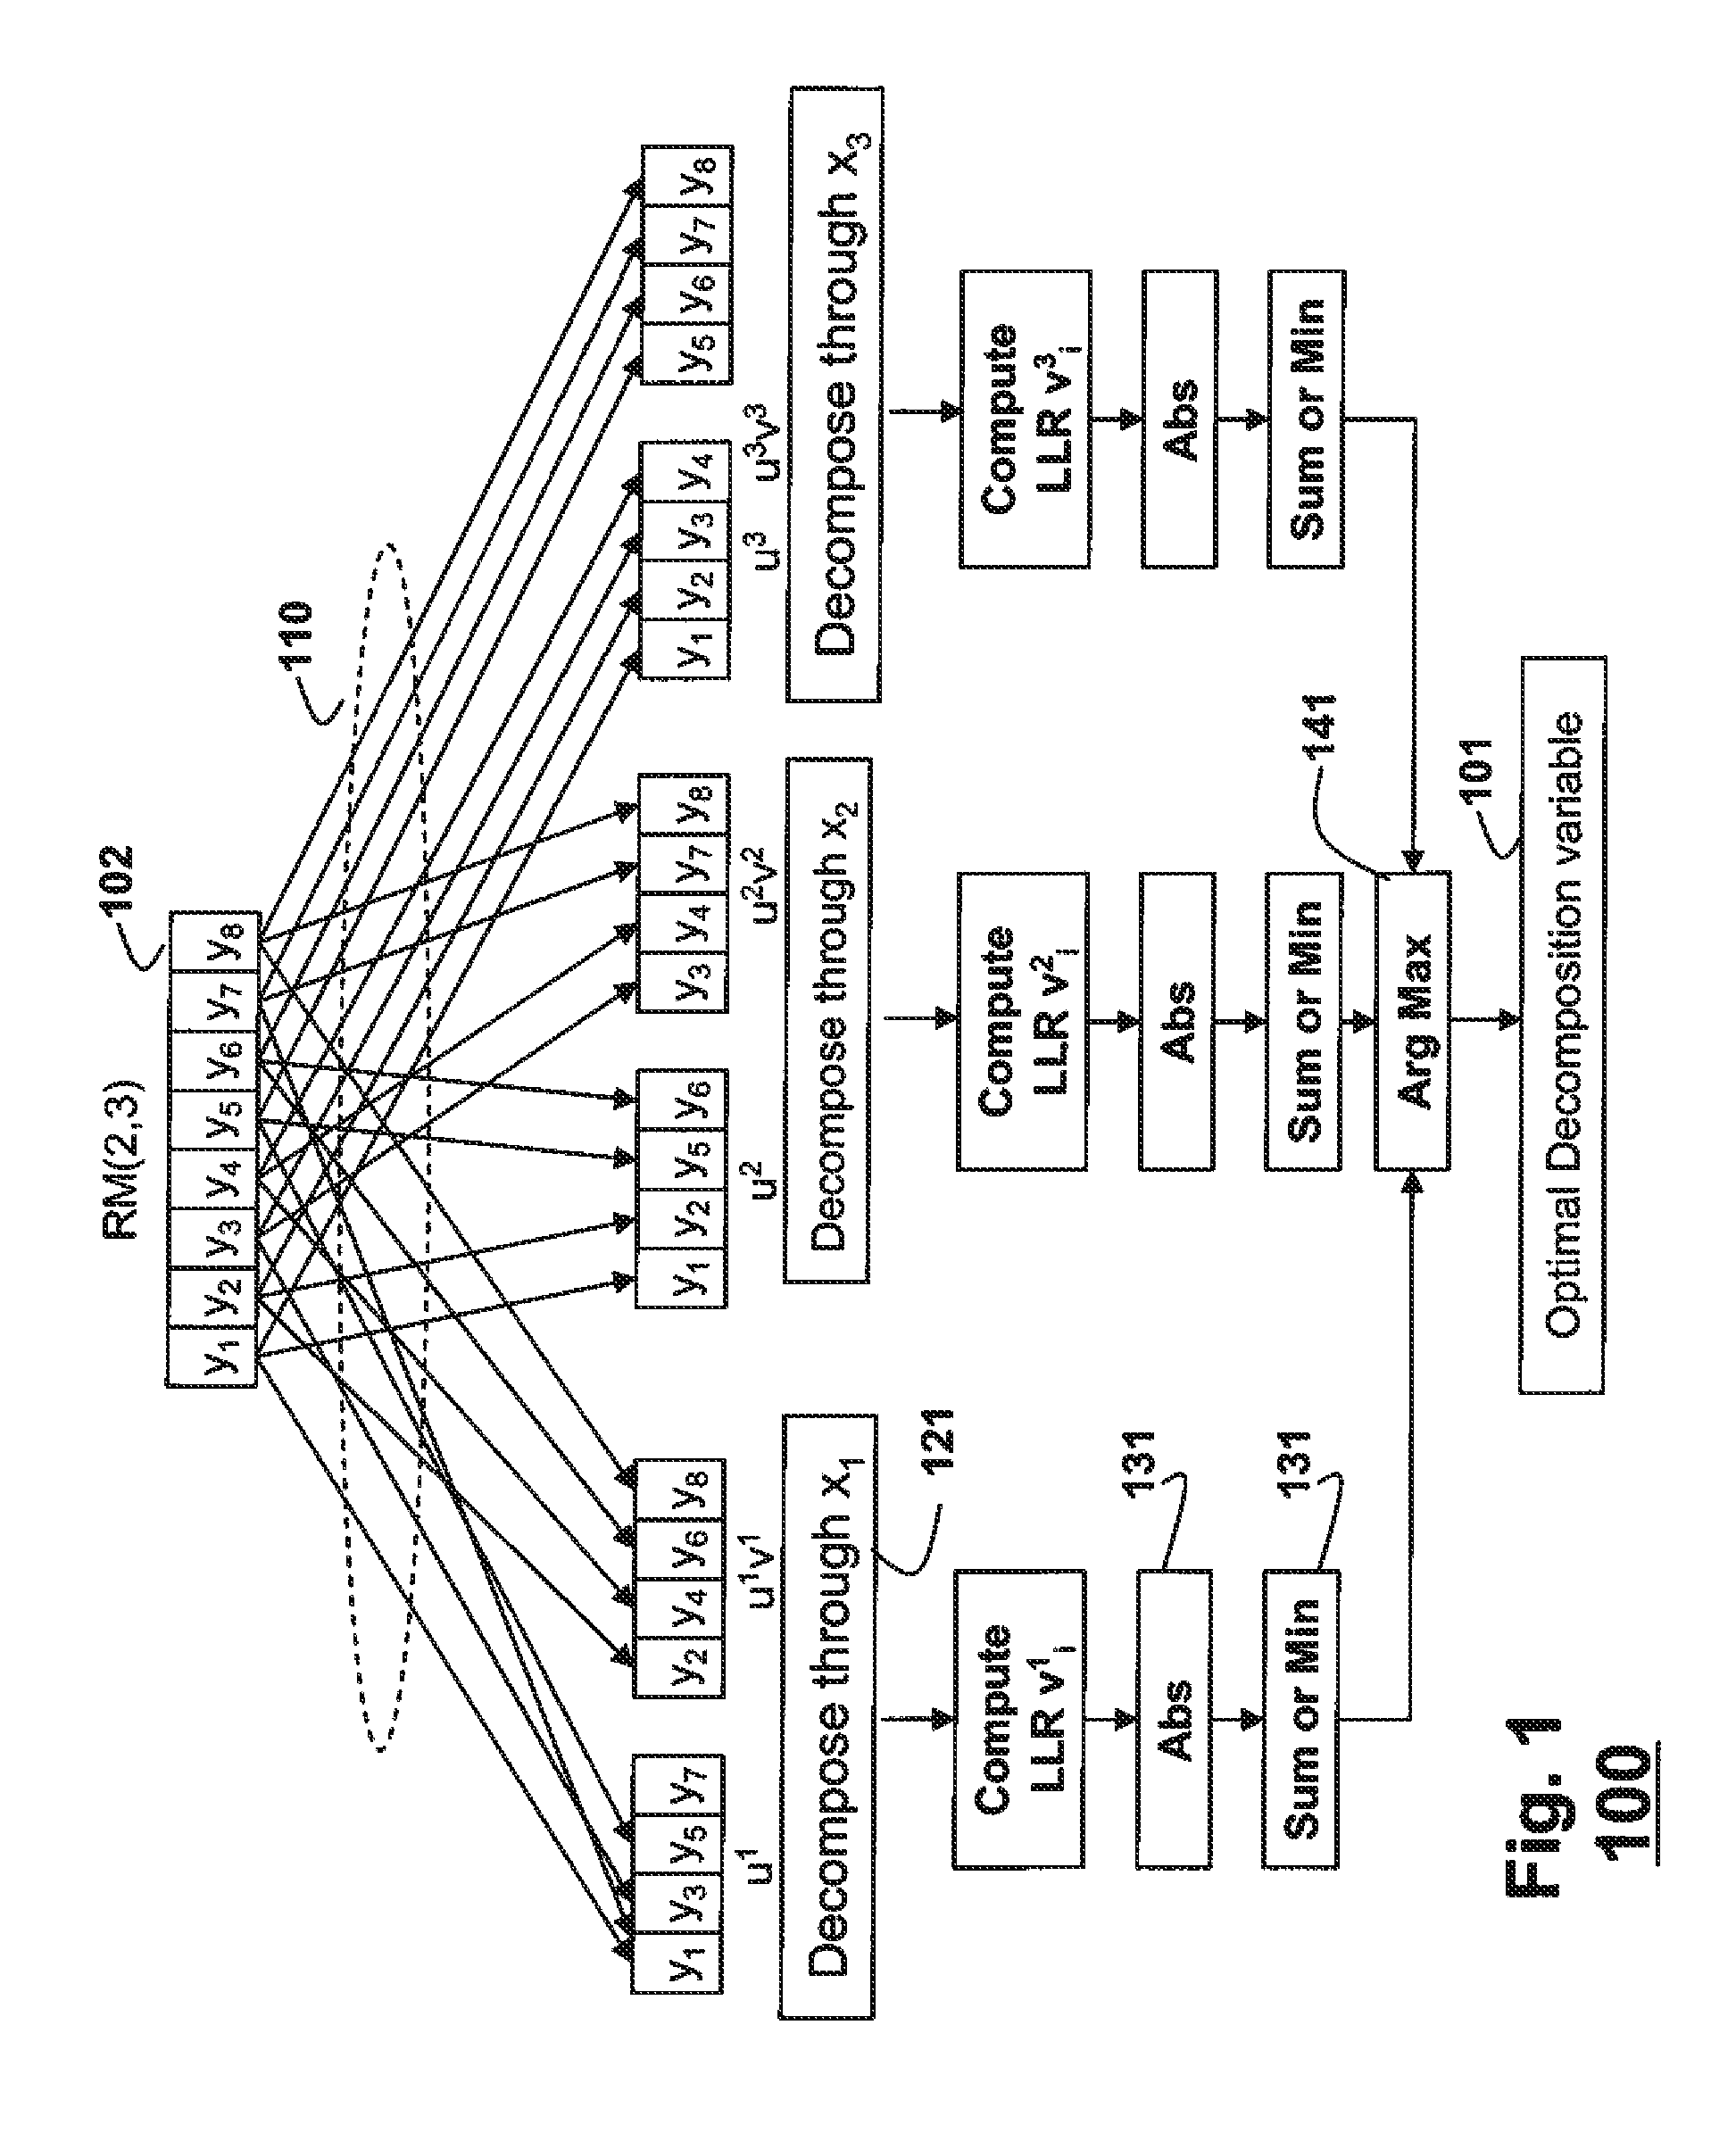 Method for performing soft decision decoding of Euclidean space Reed-Muller codes